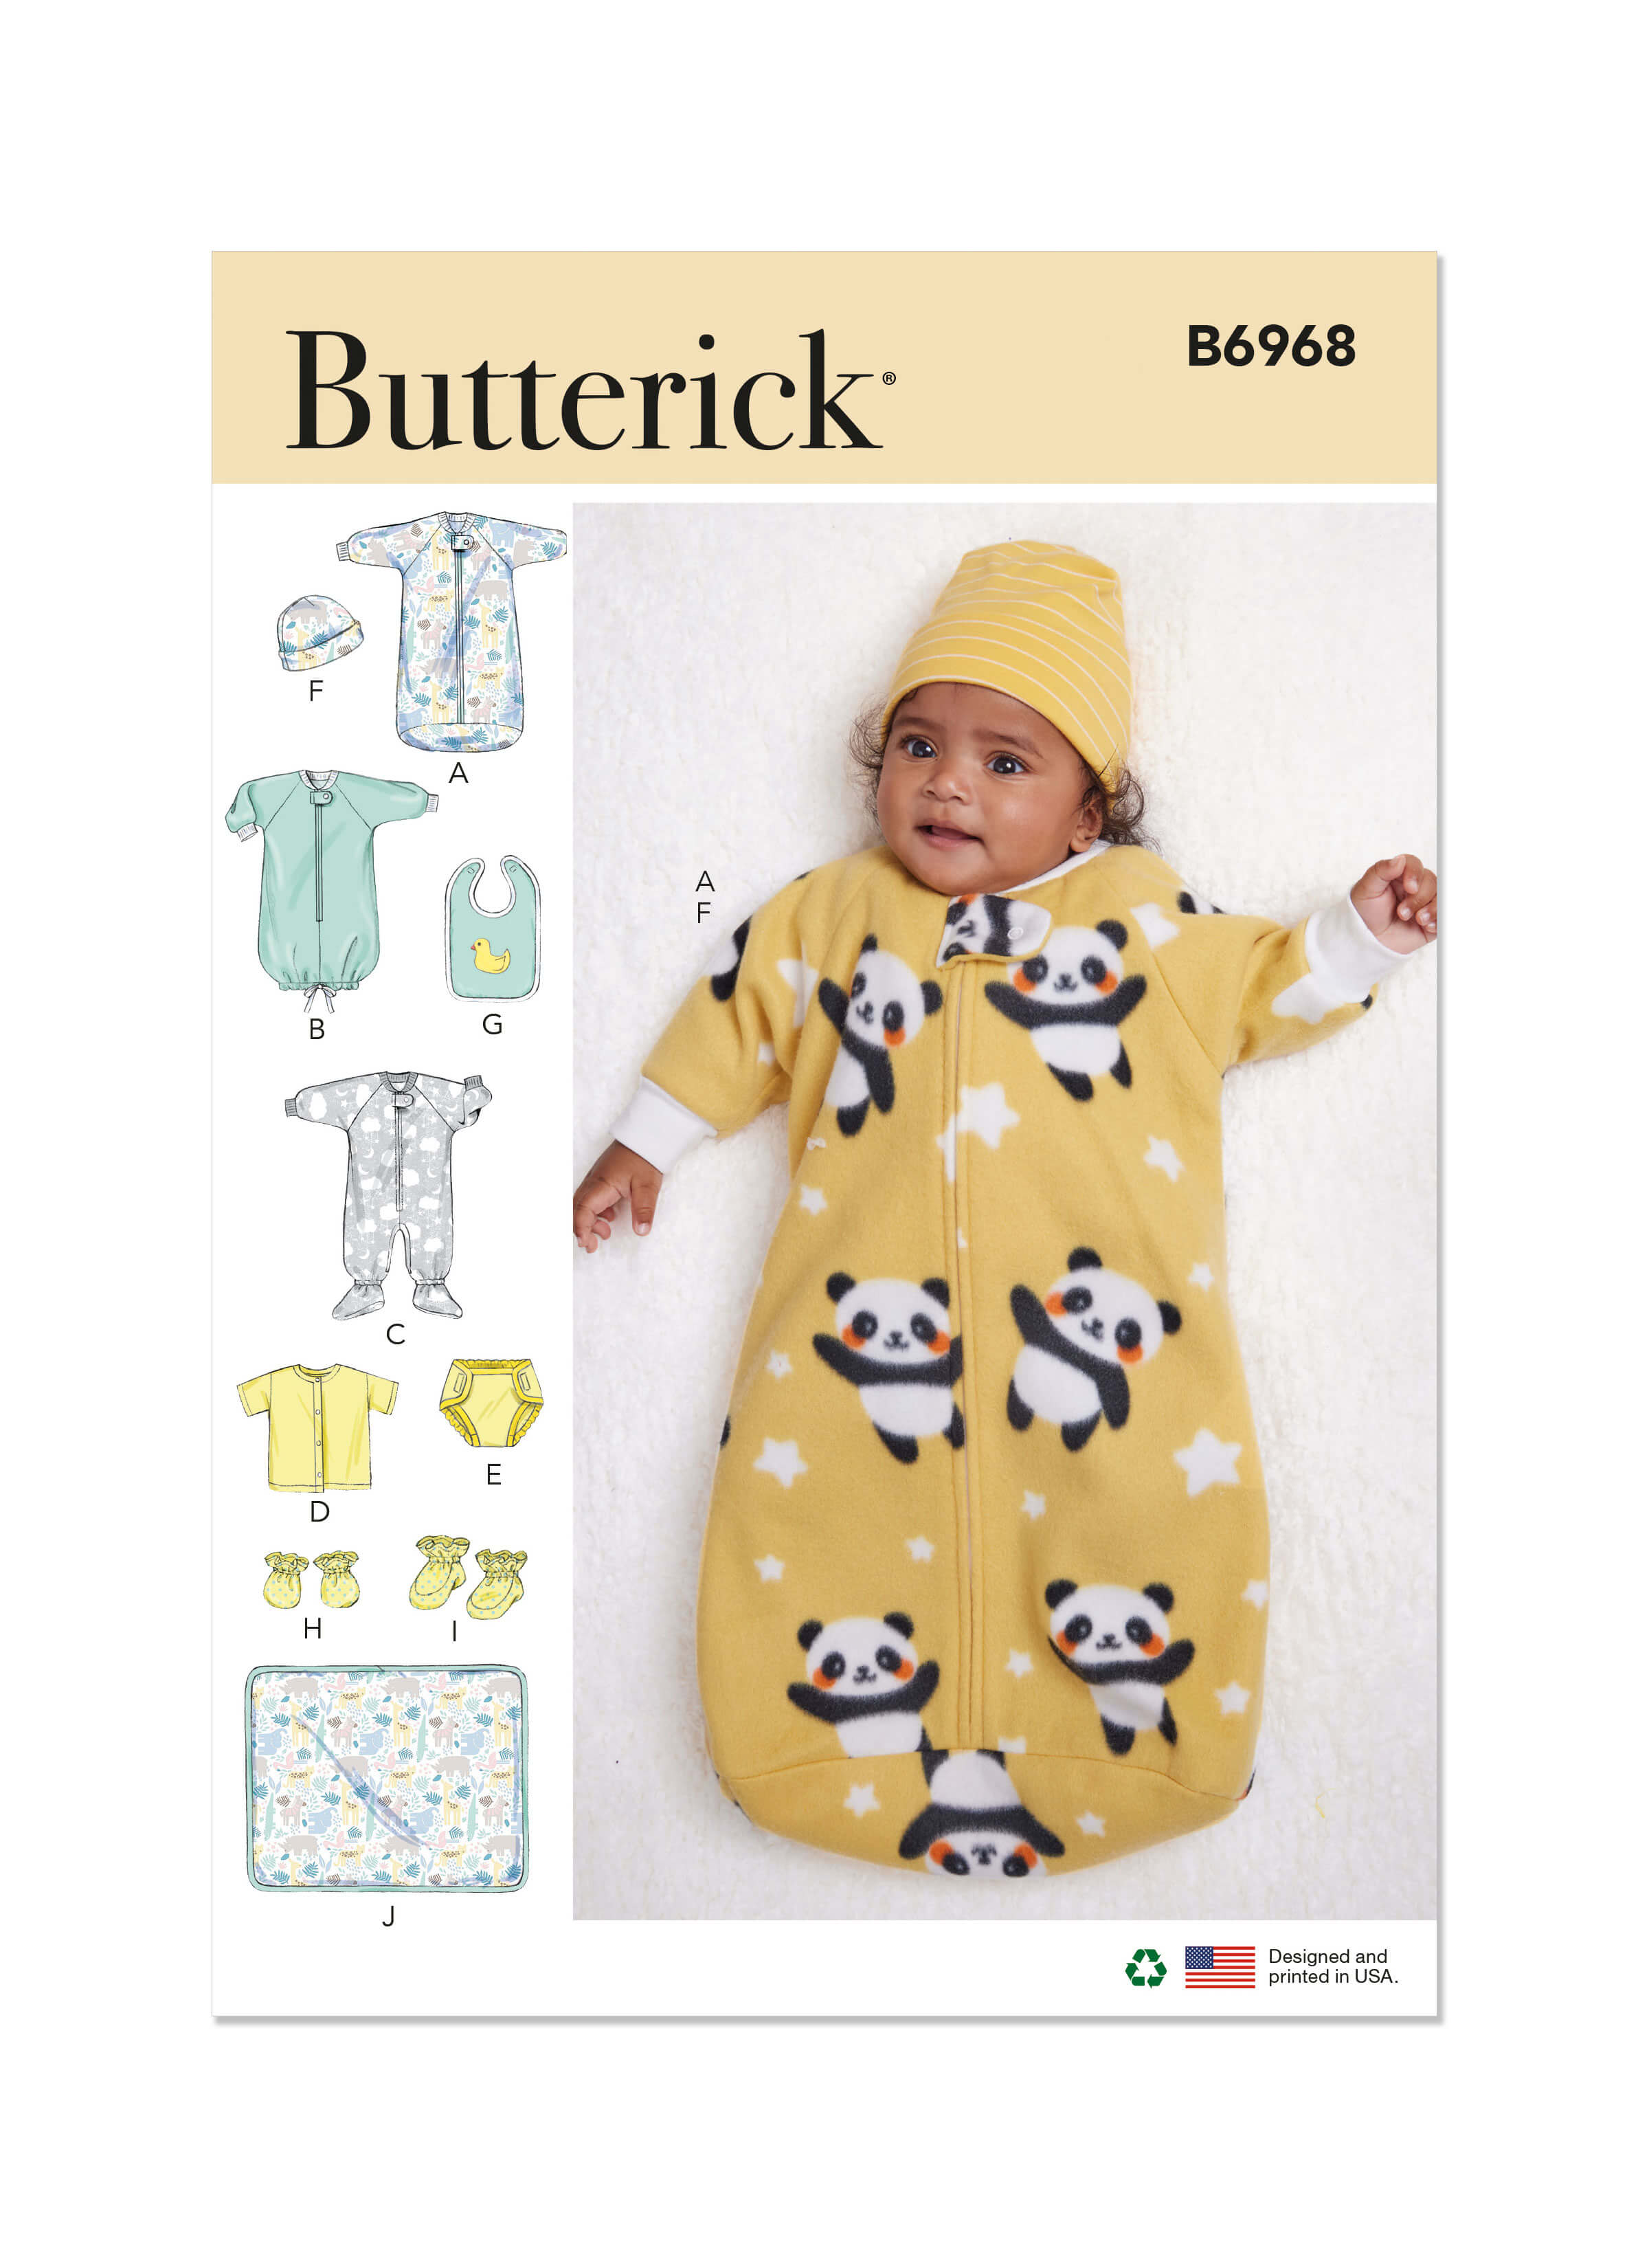 Butterick Sewing Pattern B6968 Infants' Bunting, Jumpsuit, Shirt, Nappy Pants, Hat, Bib, Mittens, Booties and Blanket